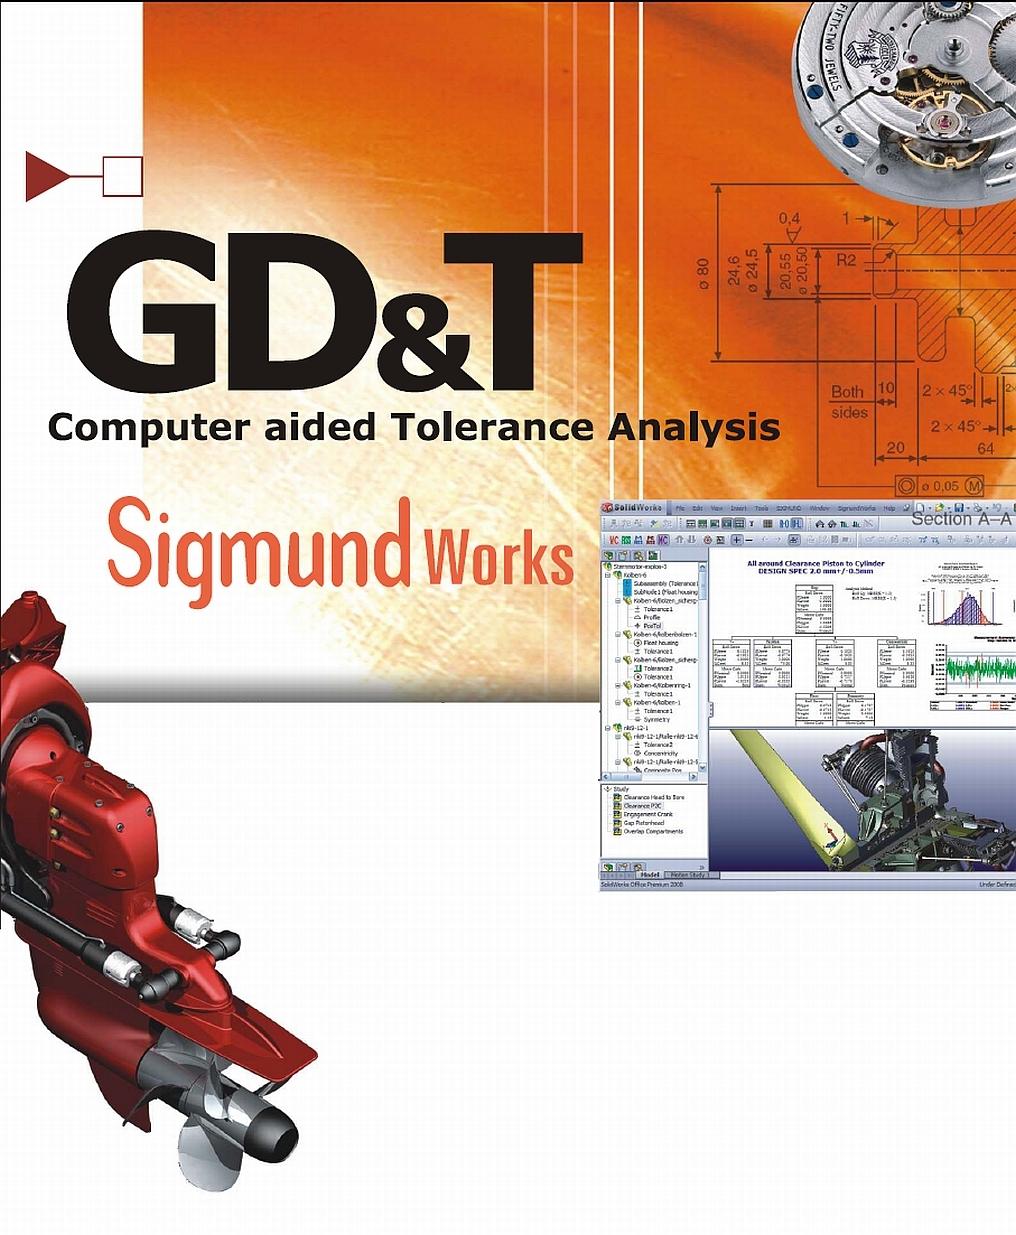 White Paper on Geometric Dimensioning & Tolerancing